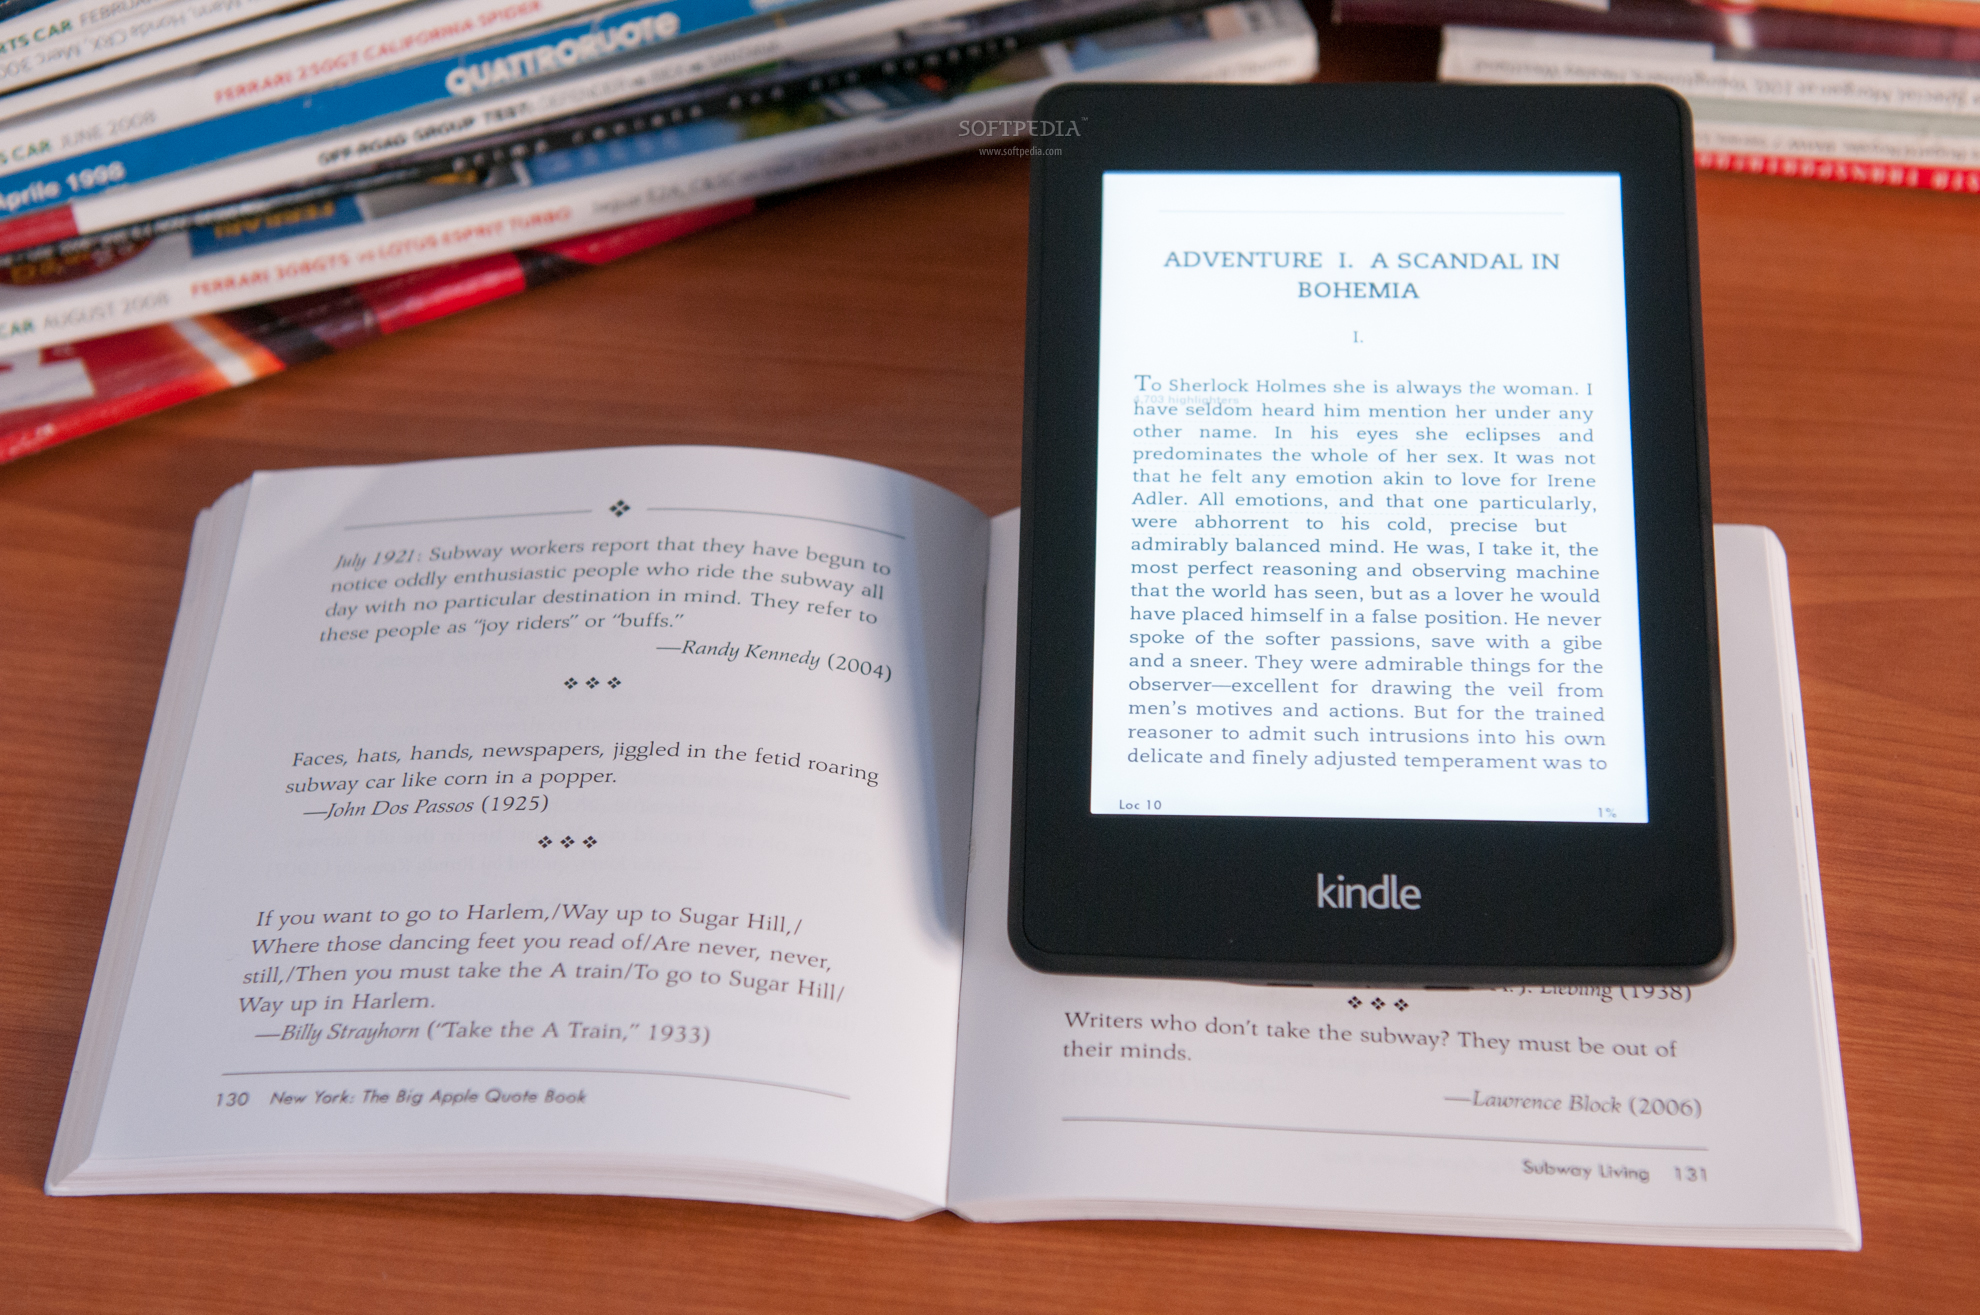 Where can you purchase the new Kindle?